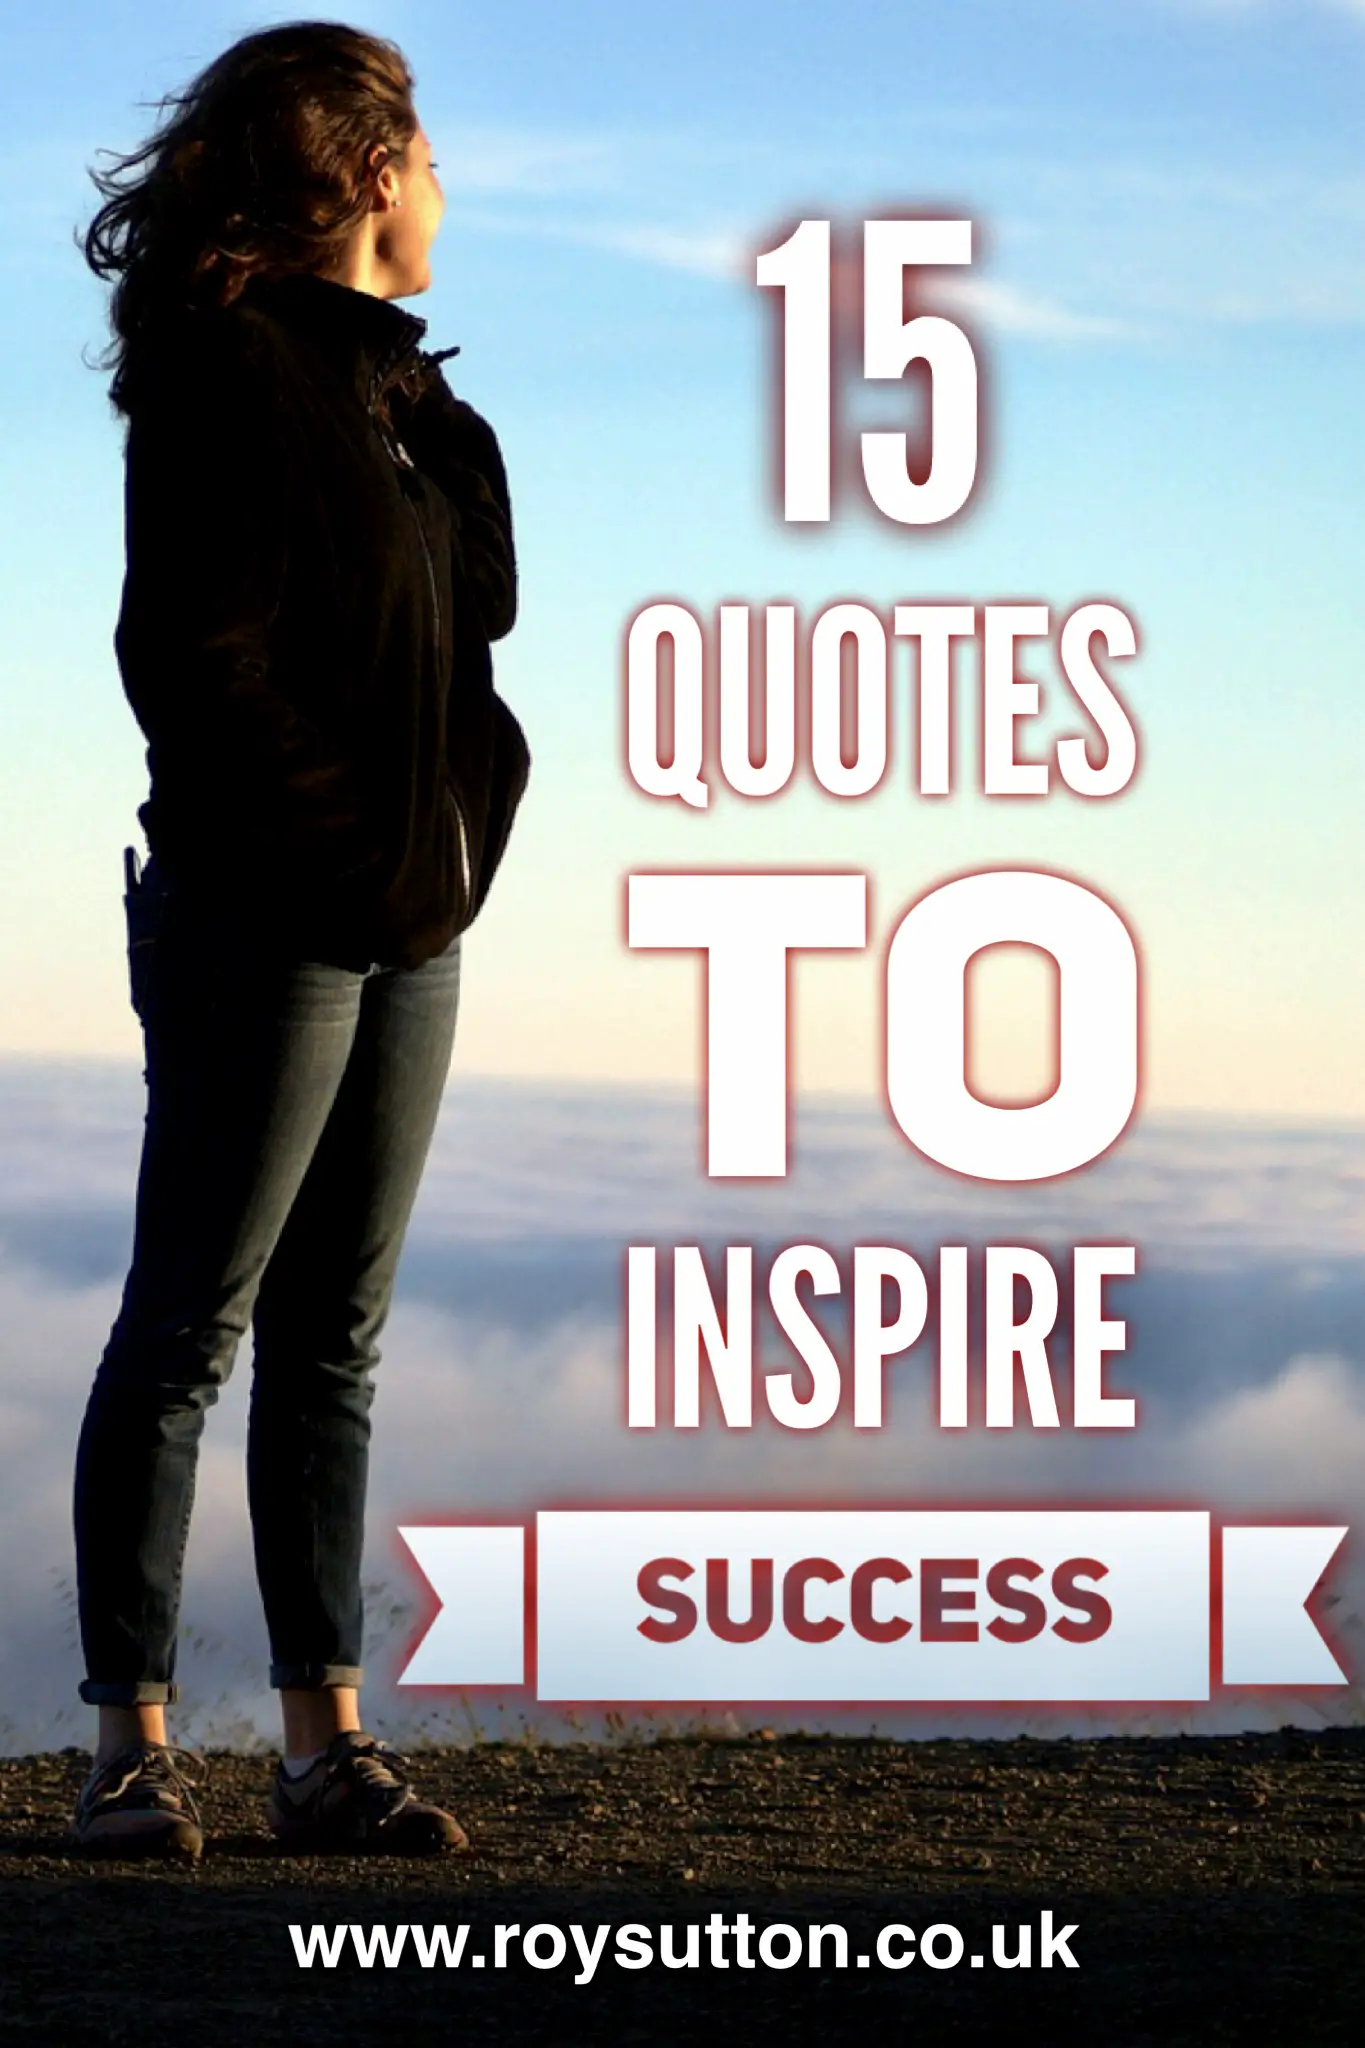 15 quotes to inspire success and encourage progress - Roy Sutton